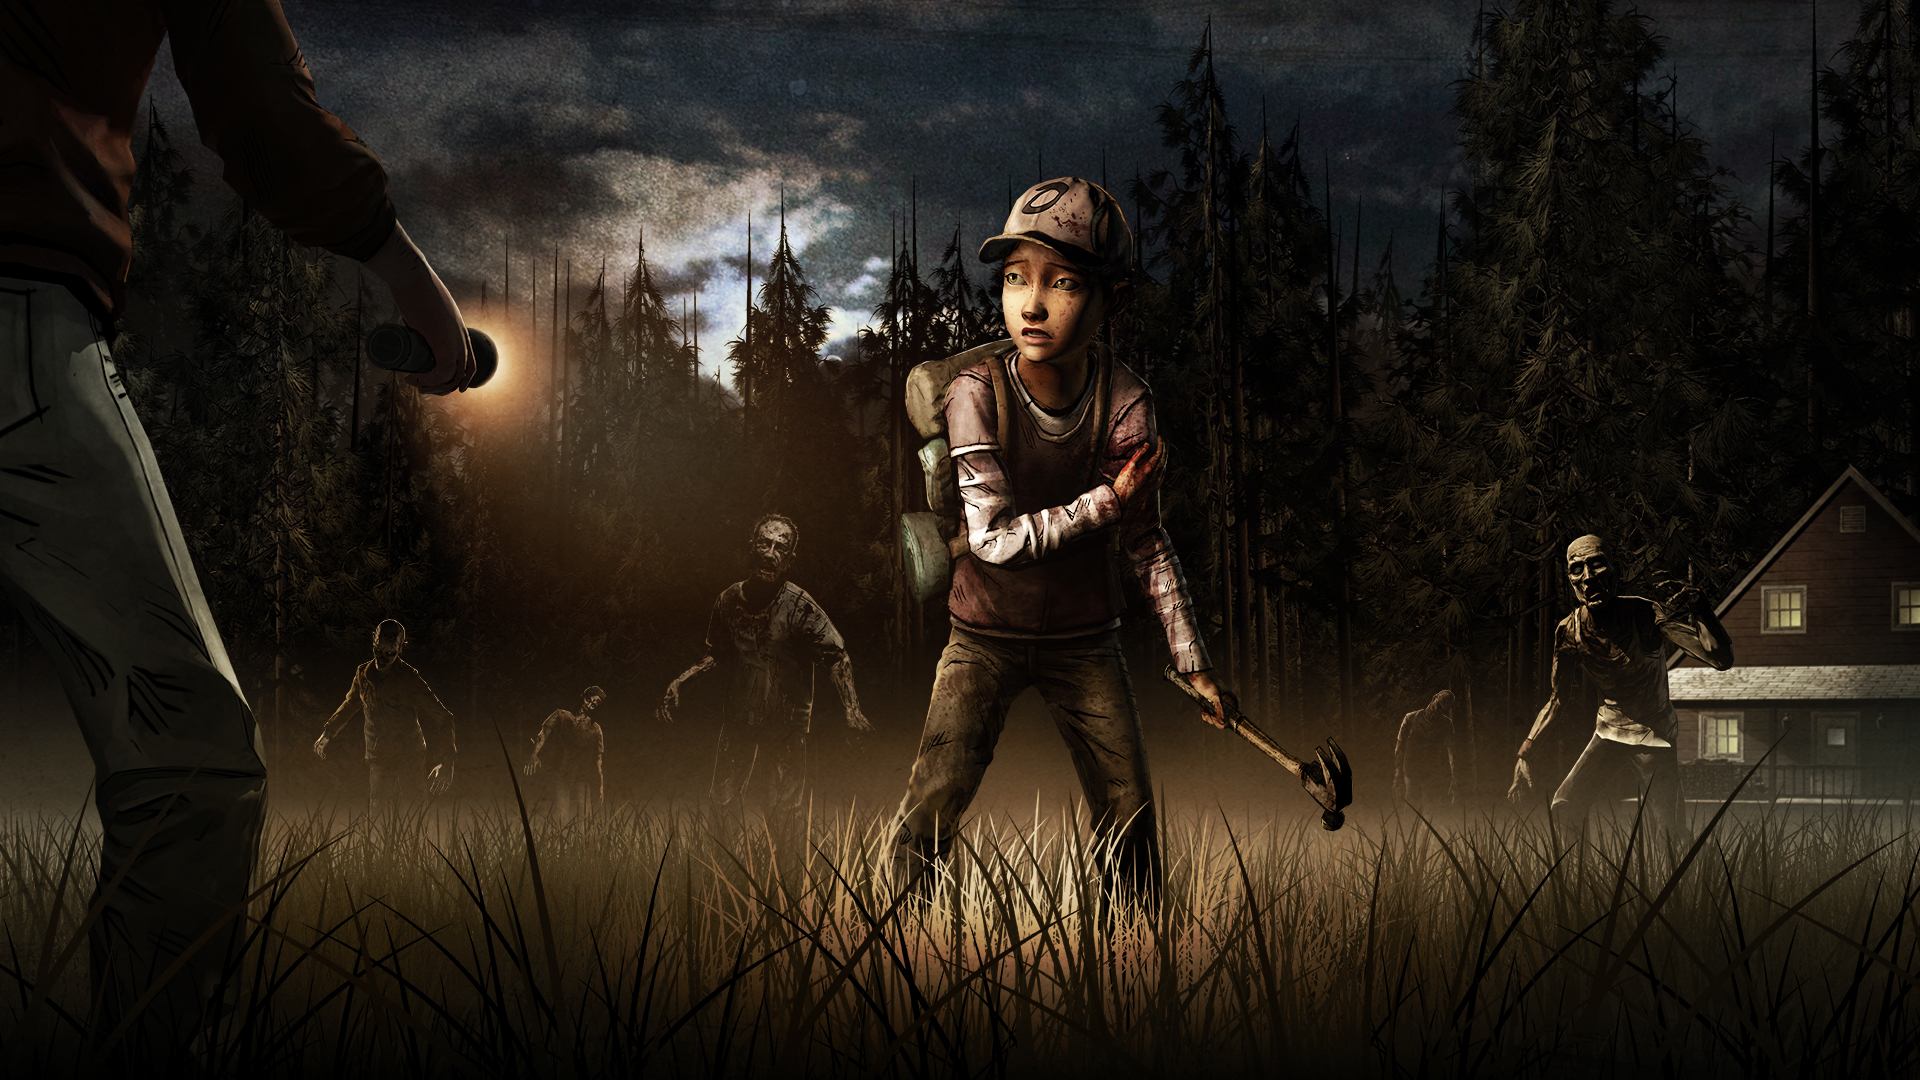 Artistry in Games 023579 Musical Moments: The Walking Dead Season 2 Series  the walking dead musical moments music  